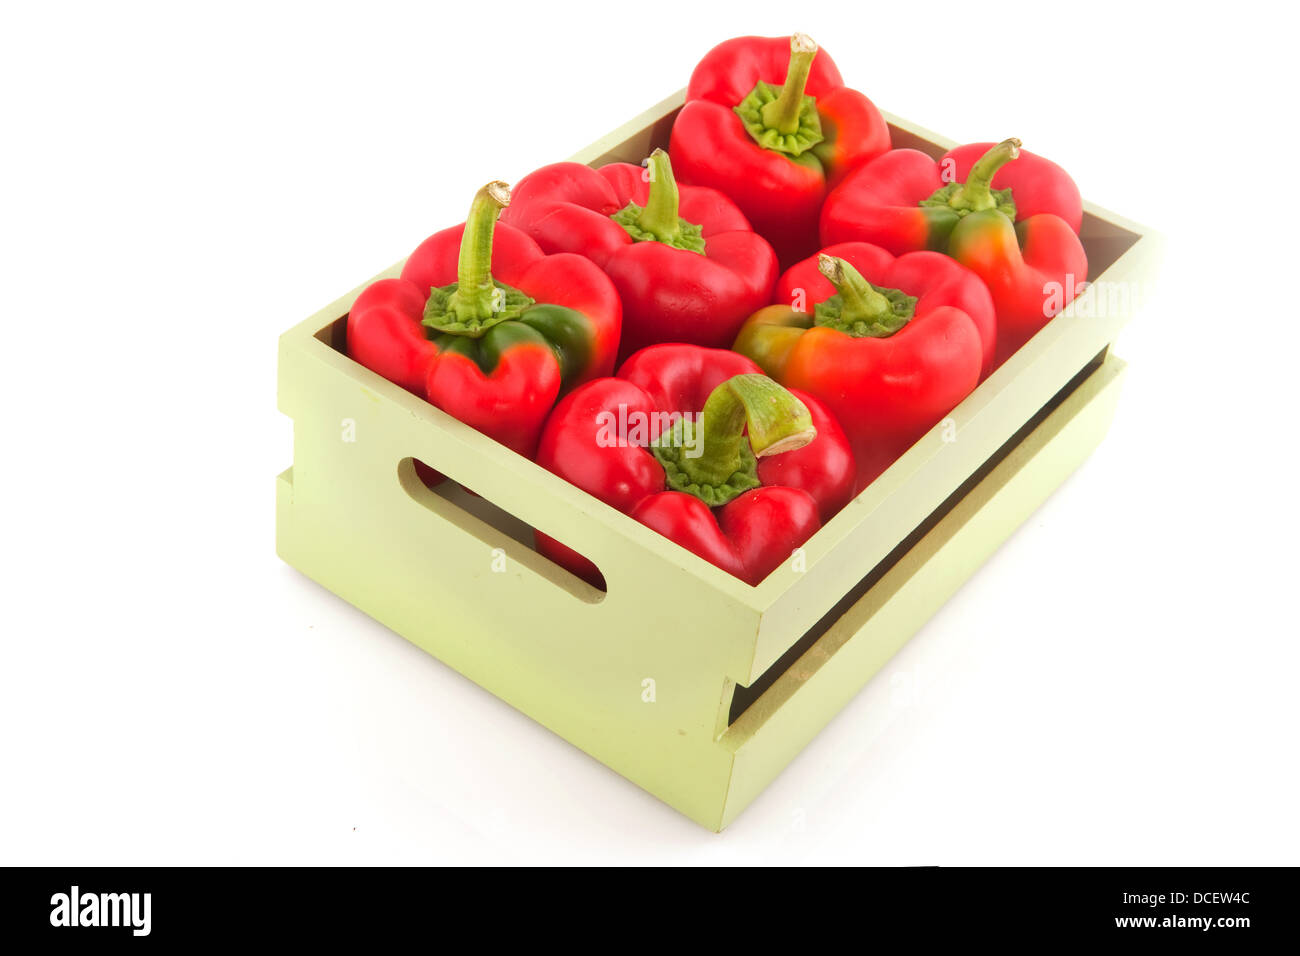 Wooden crate with vegetables Stock Photo